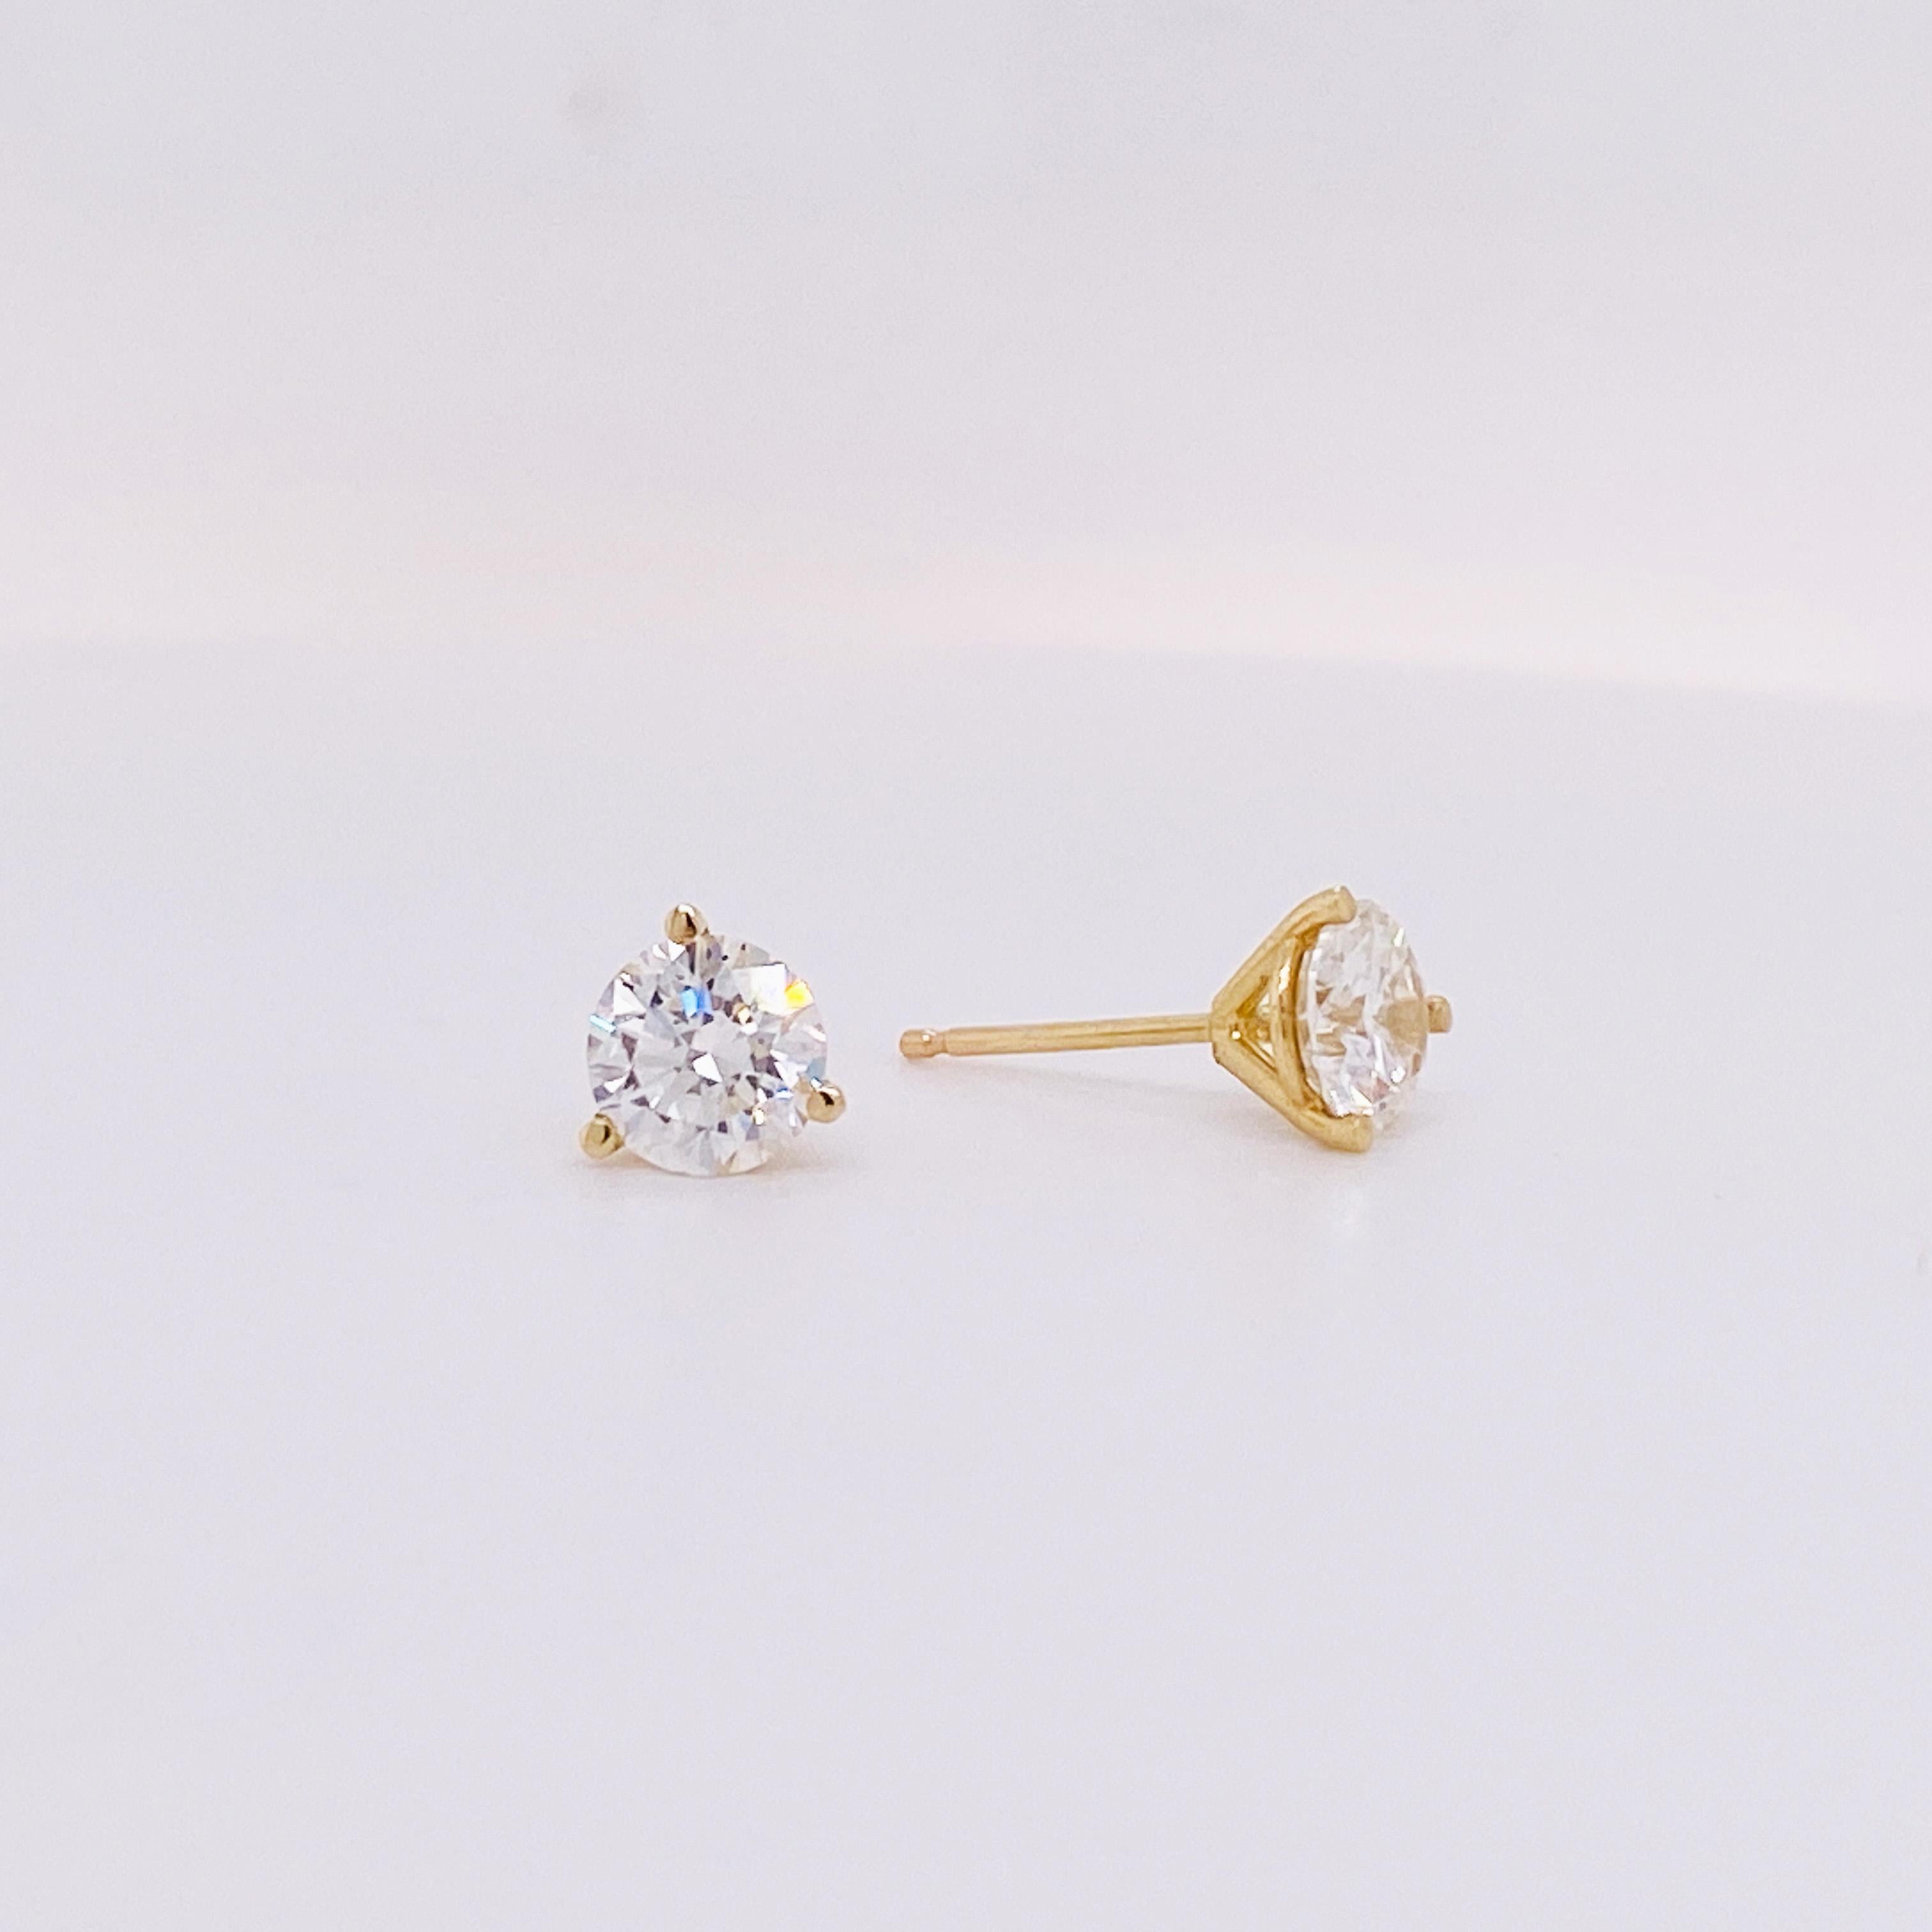 These stunning martini stud diamond earrings are perfect for any ear! Wear them alone or next to other favorite earrings! Martini studs are popular because they have a low profile close to the ear and still keep the stone proudly displayed for